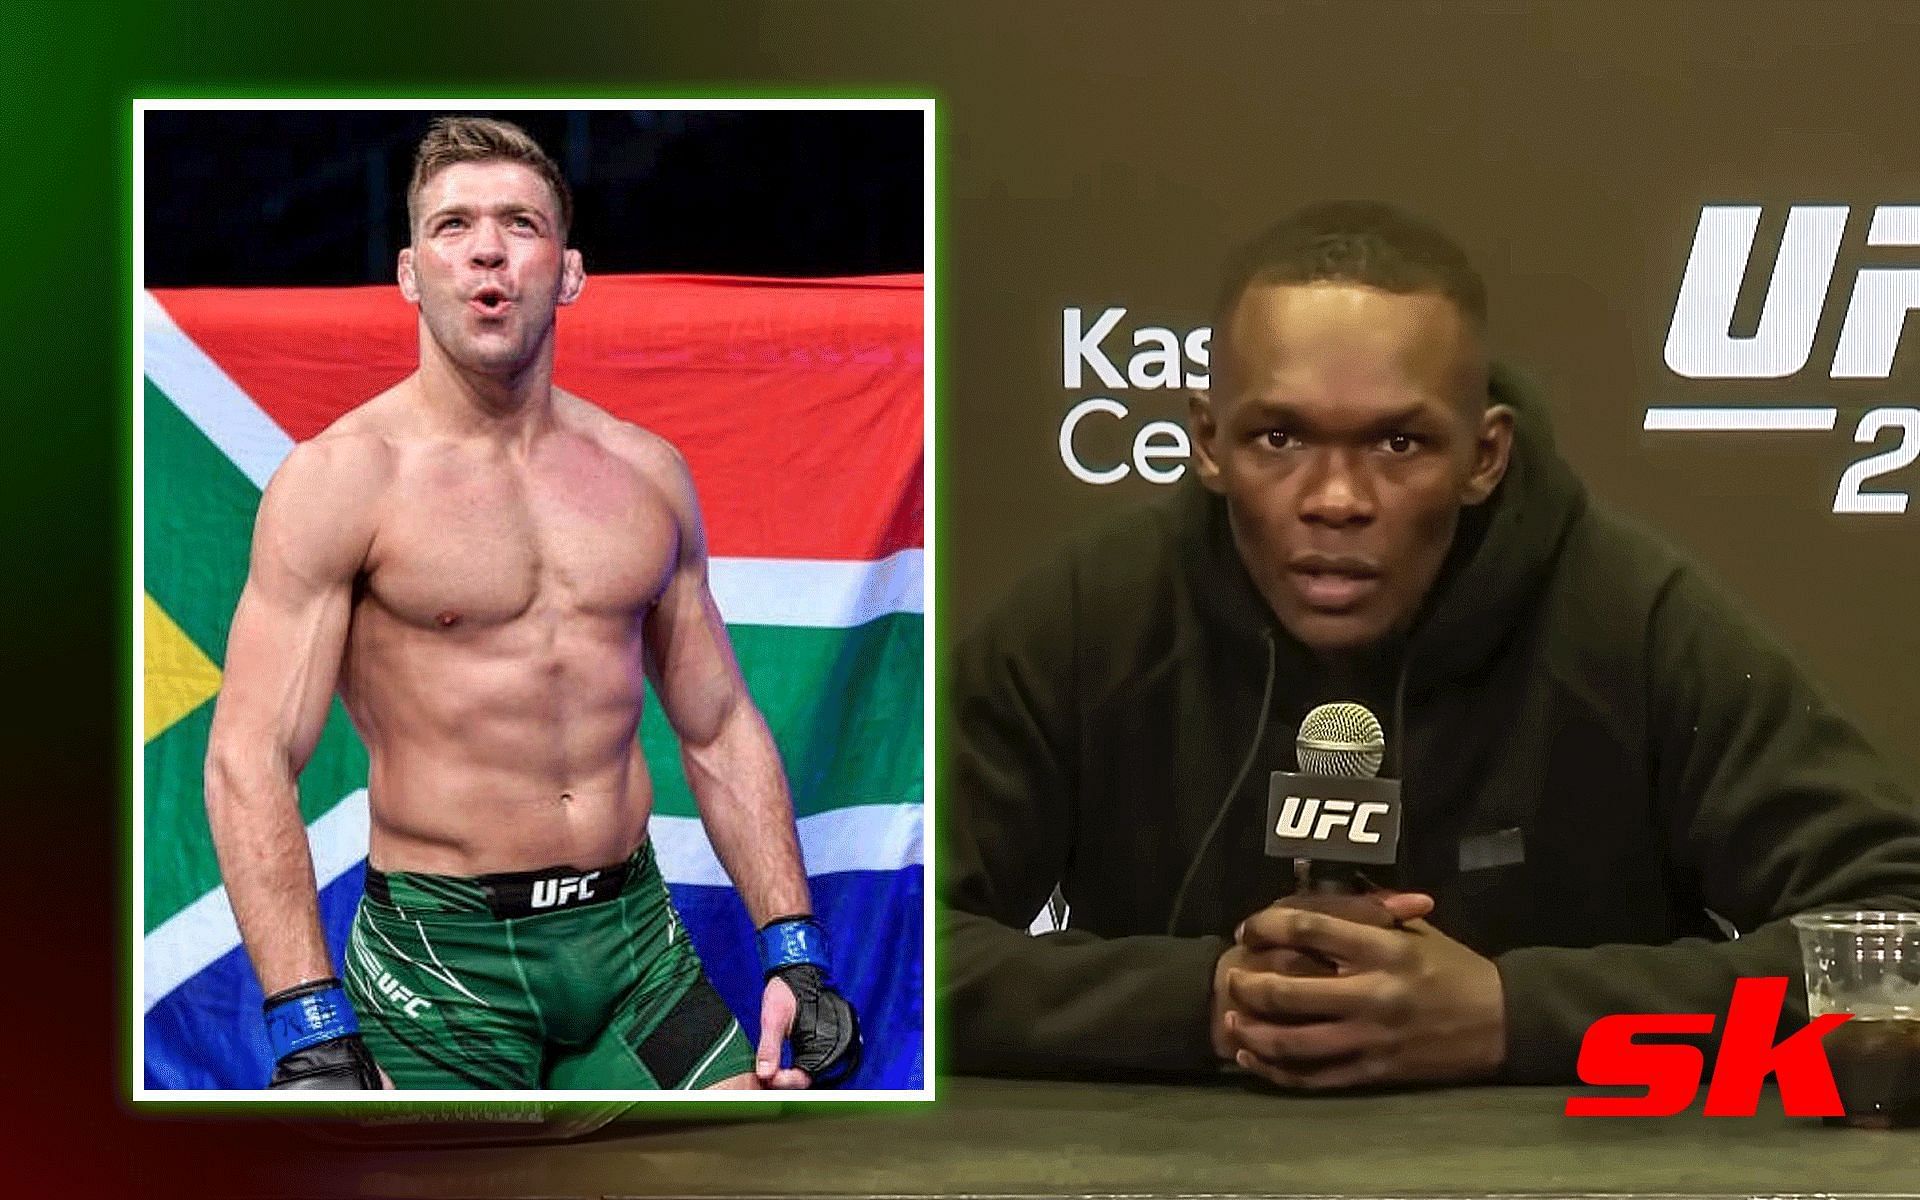 Dricus Du Plessis (left) and Israel Adesanya (right) [Image credits: @UFC on YouTube and @dricusduplessis on Instagram] 